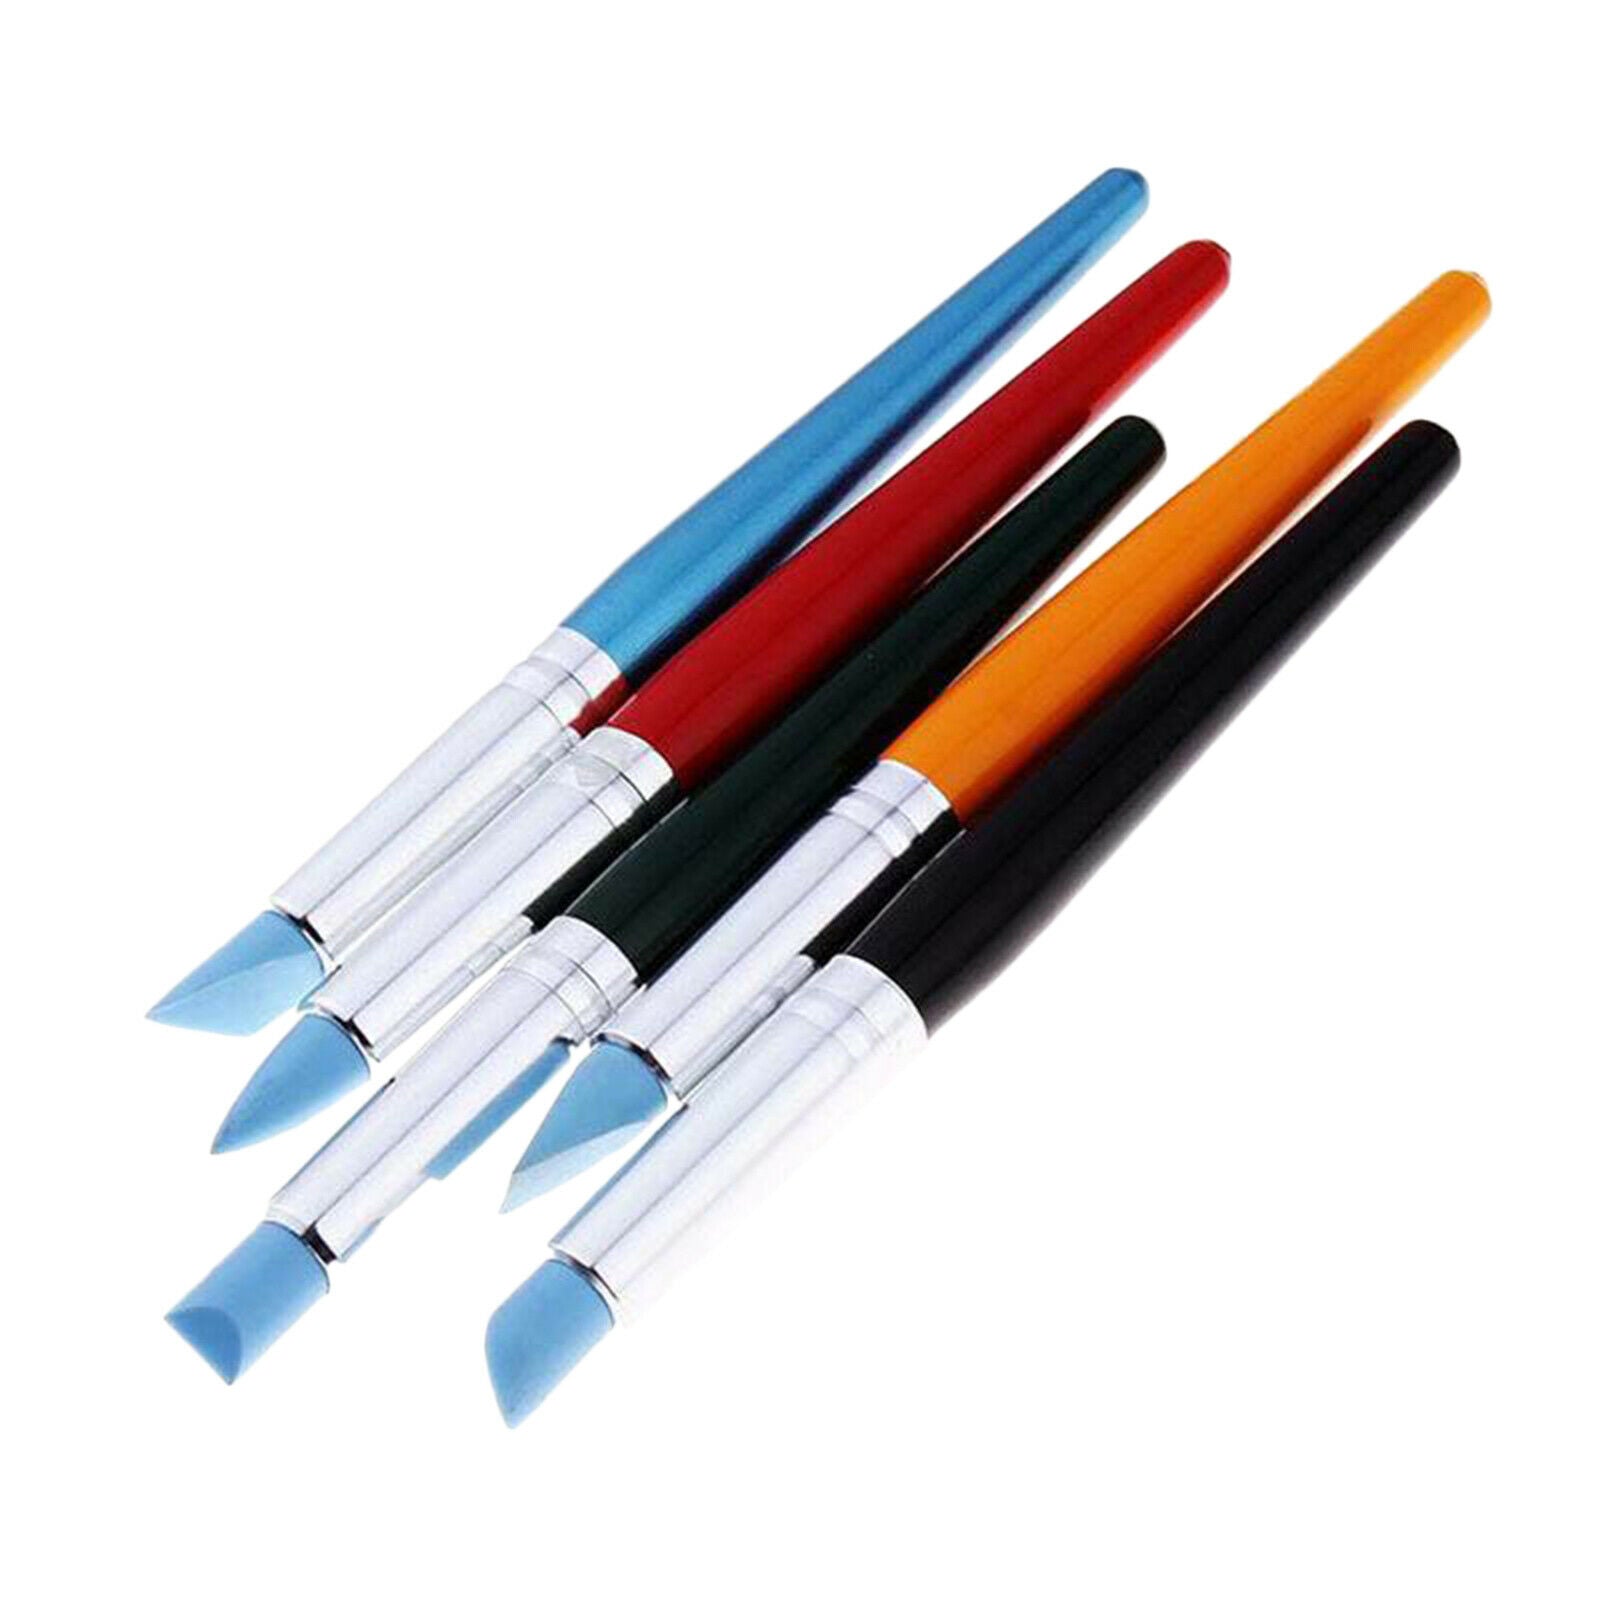 Clay Sculpting Shapers Tool Brushes Sculpture Pottery Shaping Carving Tools